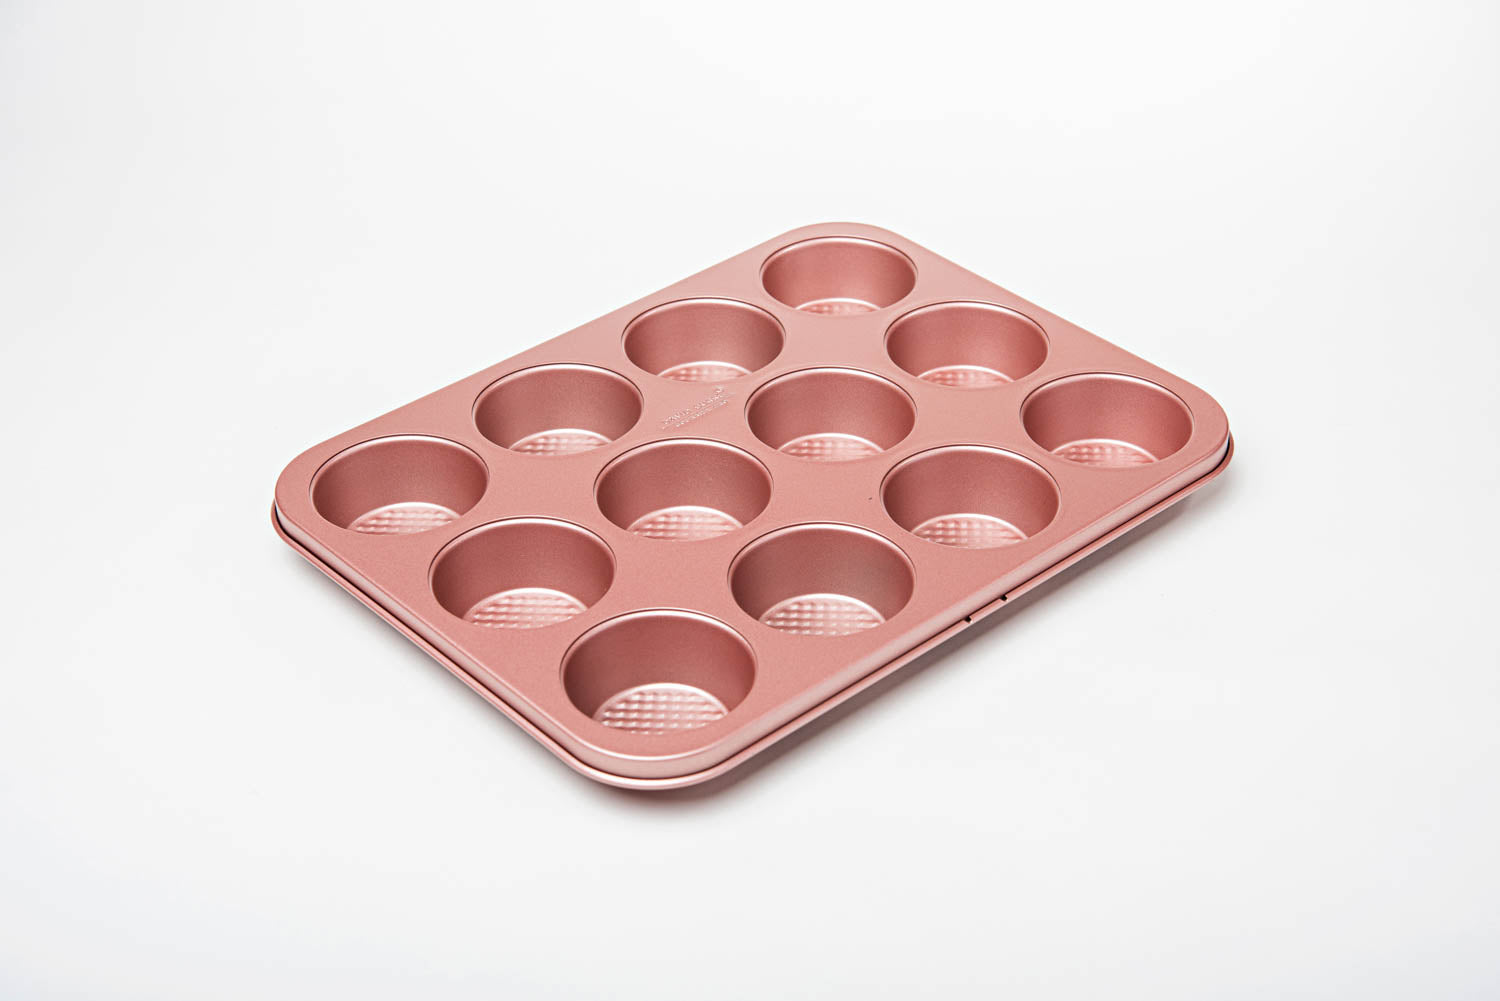 David Burke Kitchen Commerical Weight 12 Cup Muffin Pan BY David